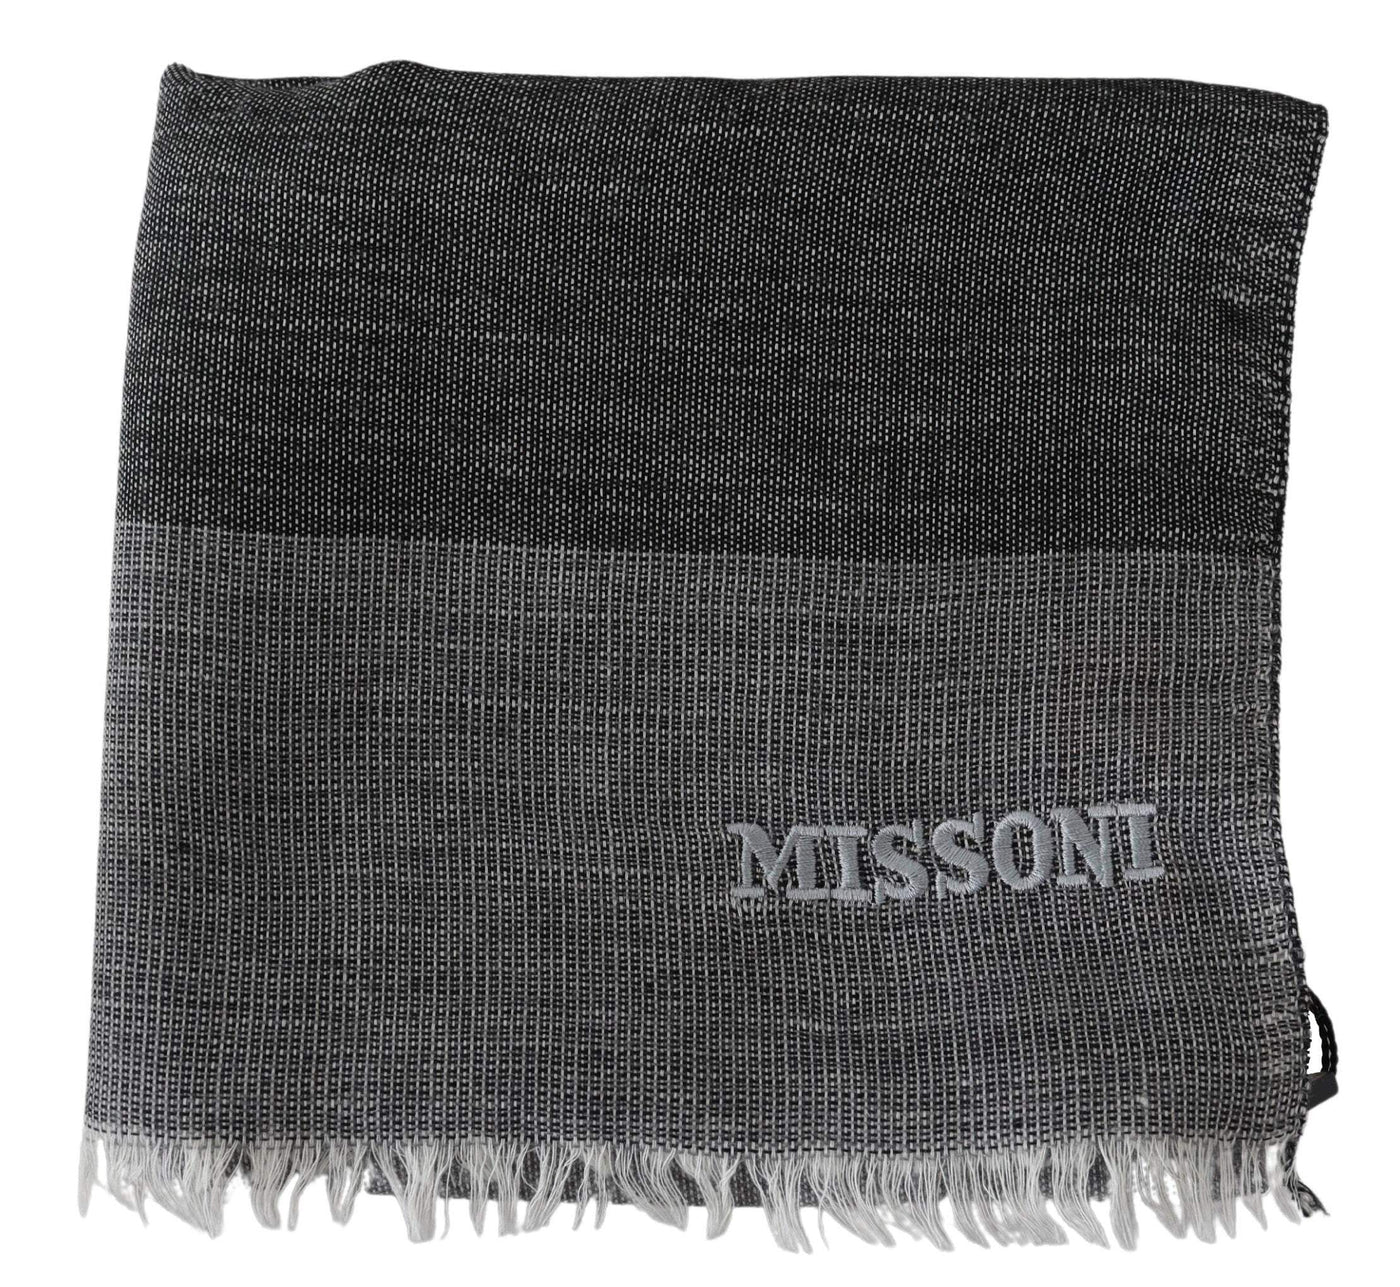 Missoni Gray Striped Wool Unisex Neck Wrap Fringes Scarf #men, Accessories - New Arrivals, feed-agegroup-adult, feed-color-Gray, feed-gender-male, Gray, Missoni, Scarves - Men - Accessories at SEYMAYKA